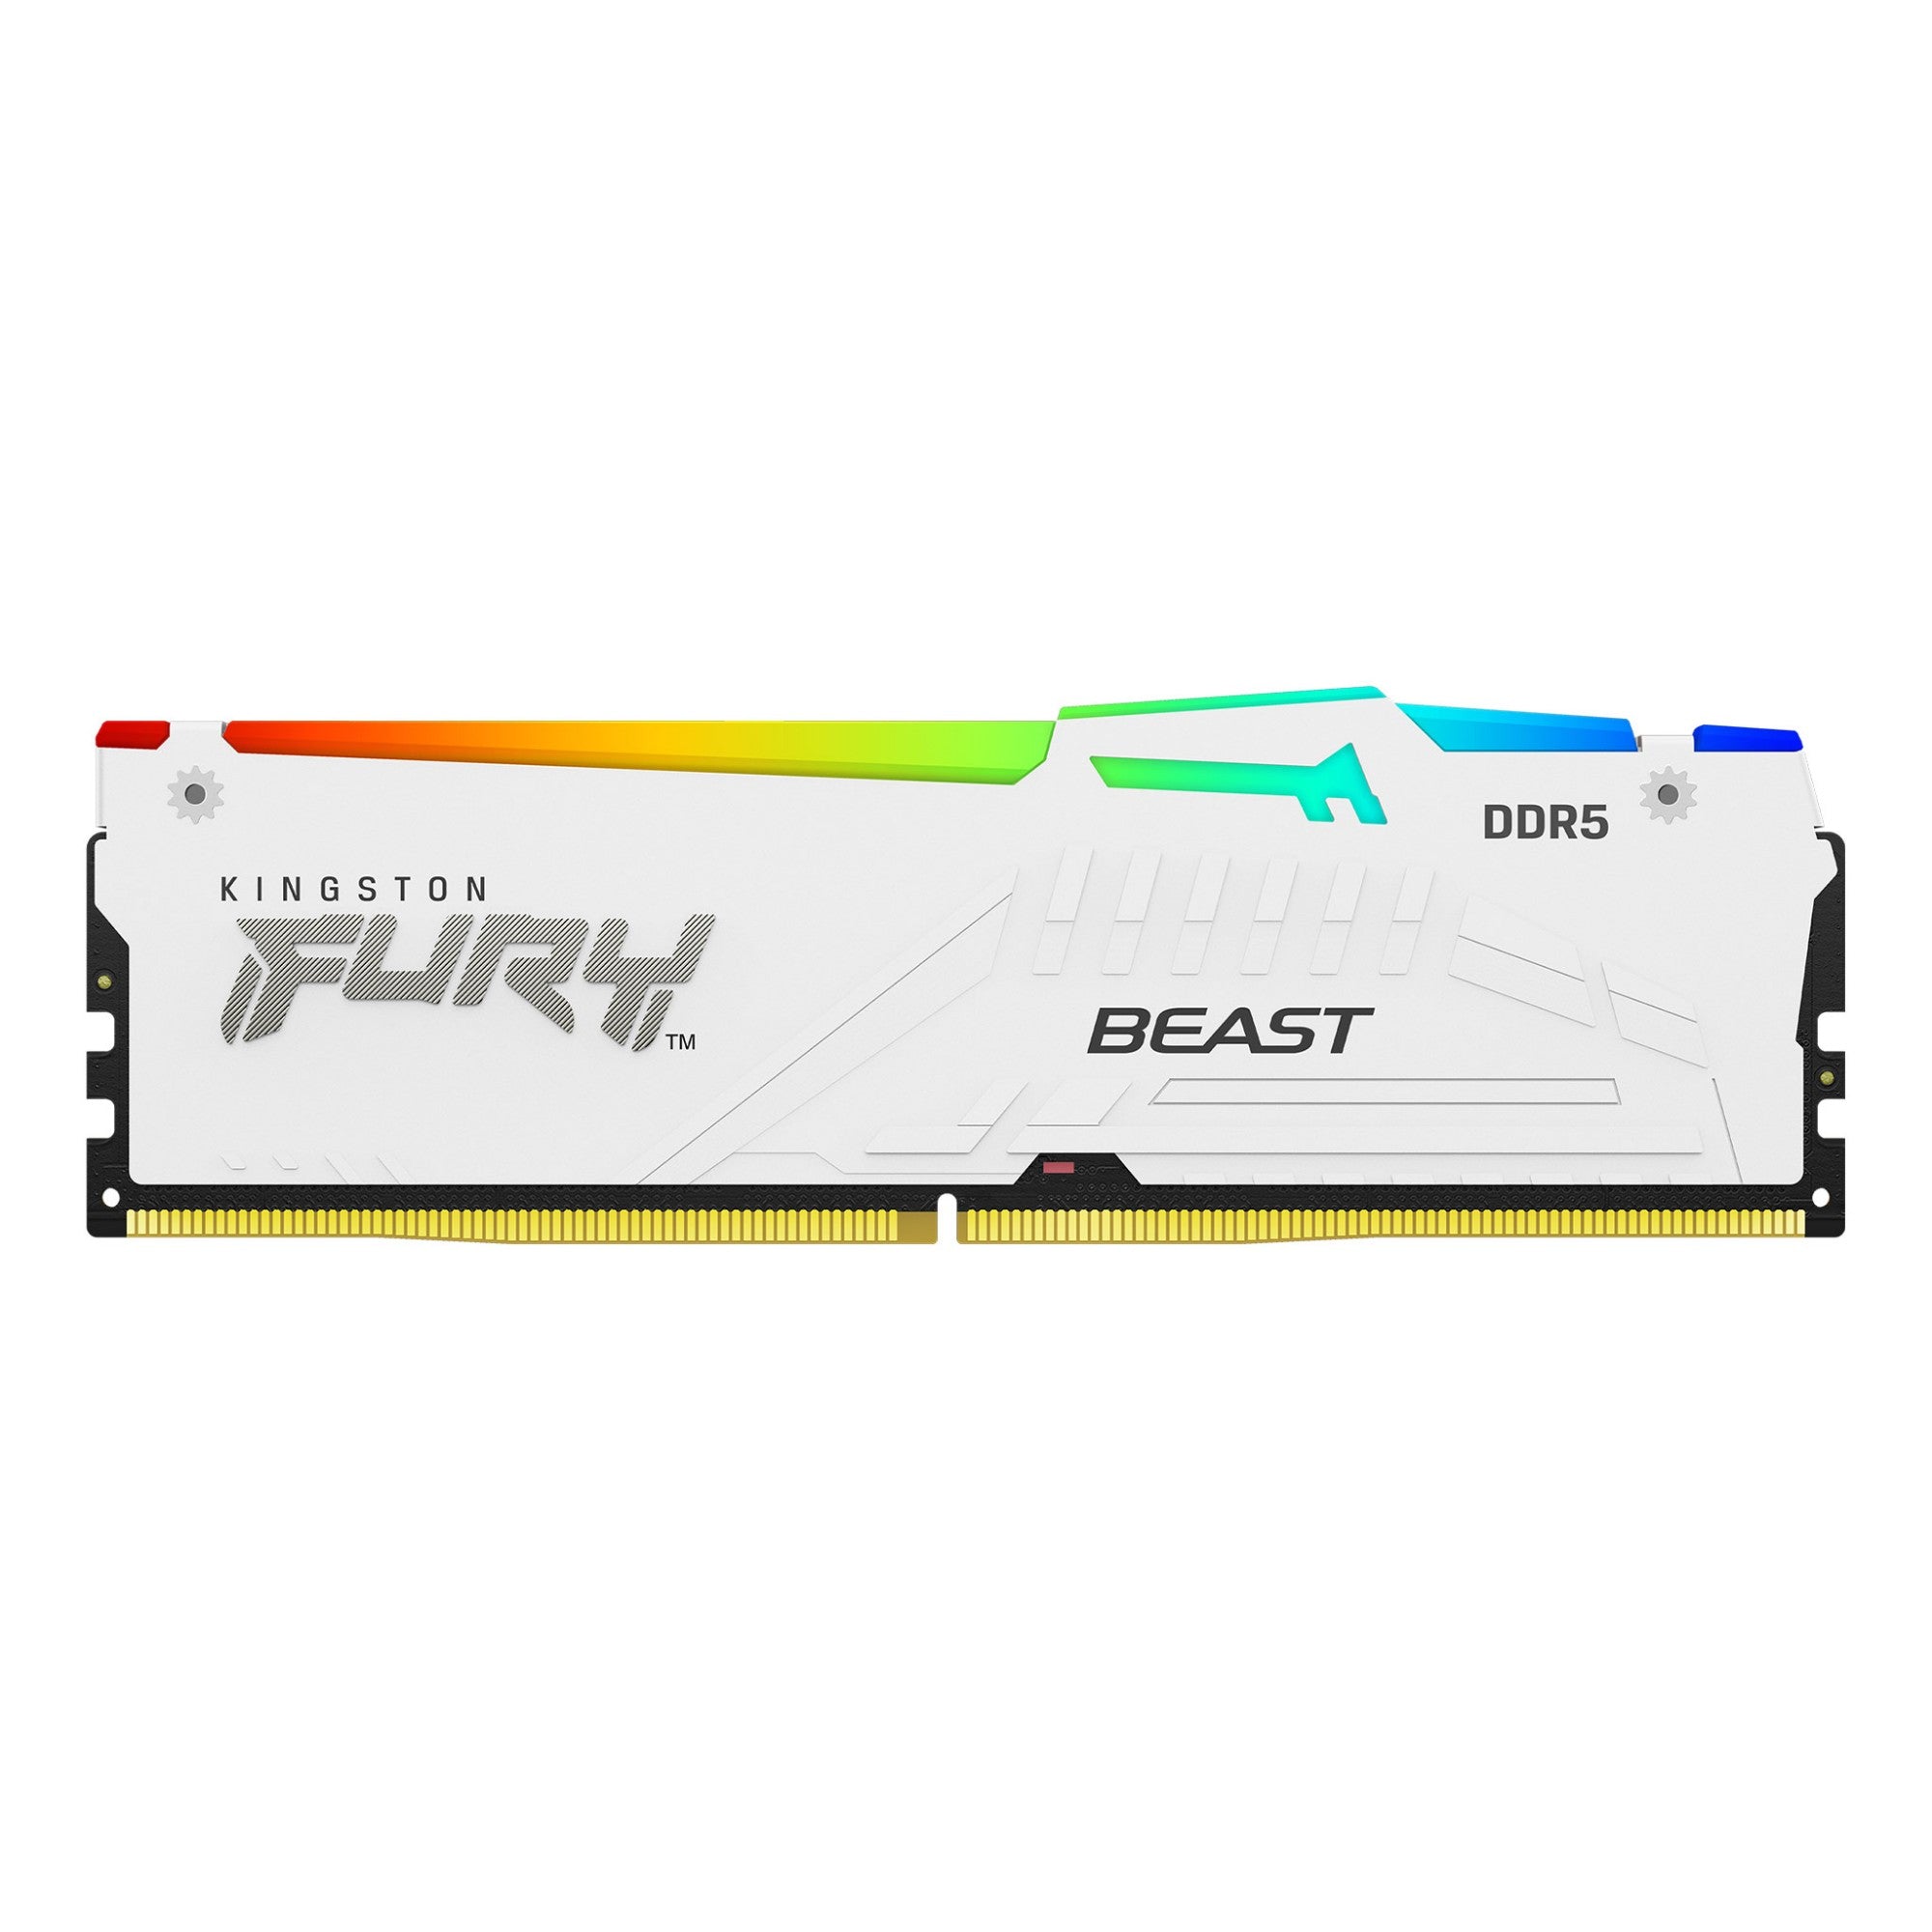 Kingston Technology FURY Beast 16GB 5200MT/s DDR5 CL36 DIMM White RGB EXPO